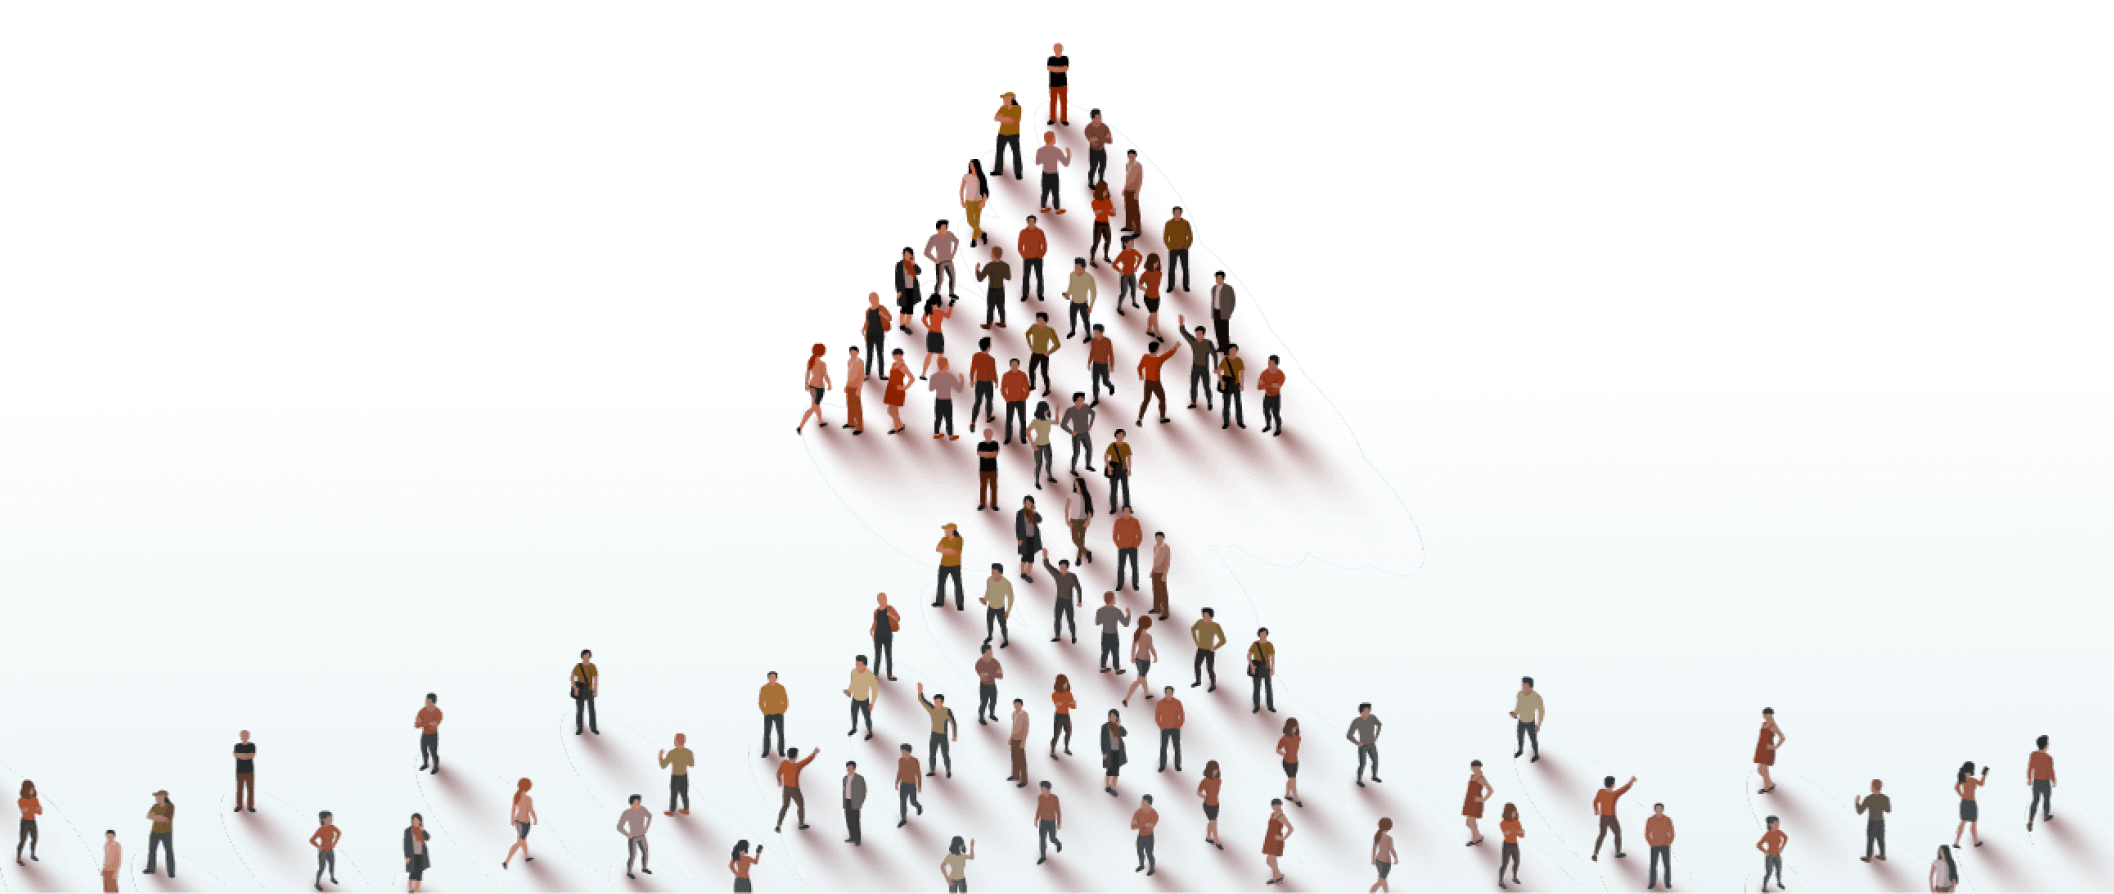 Illustration of many people in a candidate pool forming an arrow pointing up